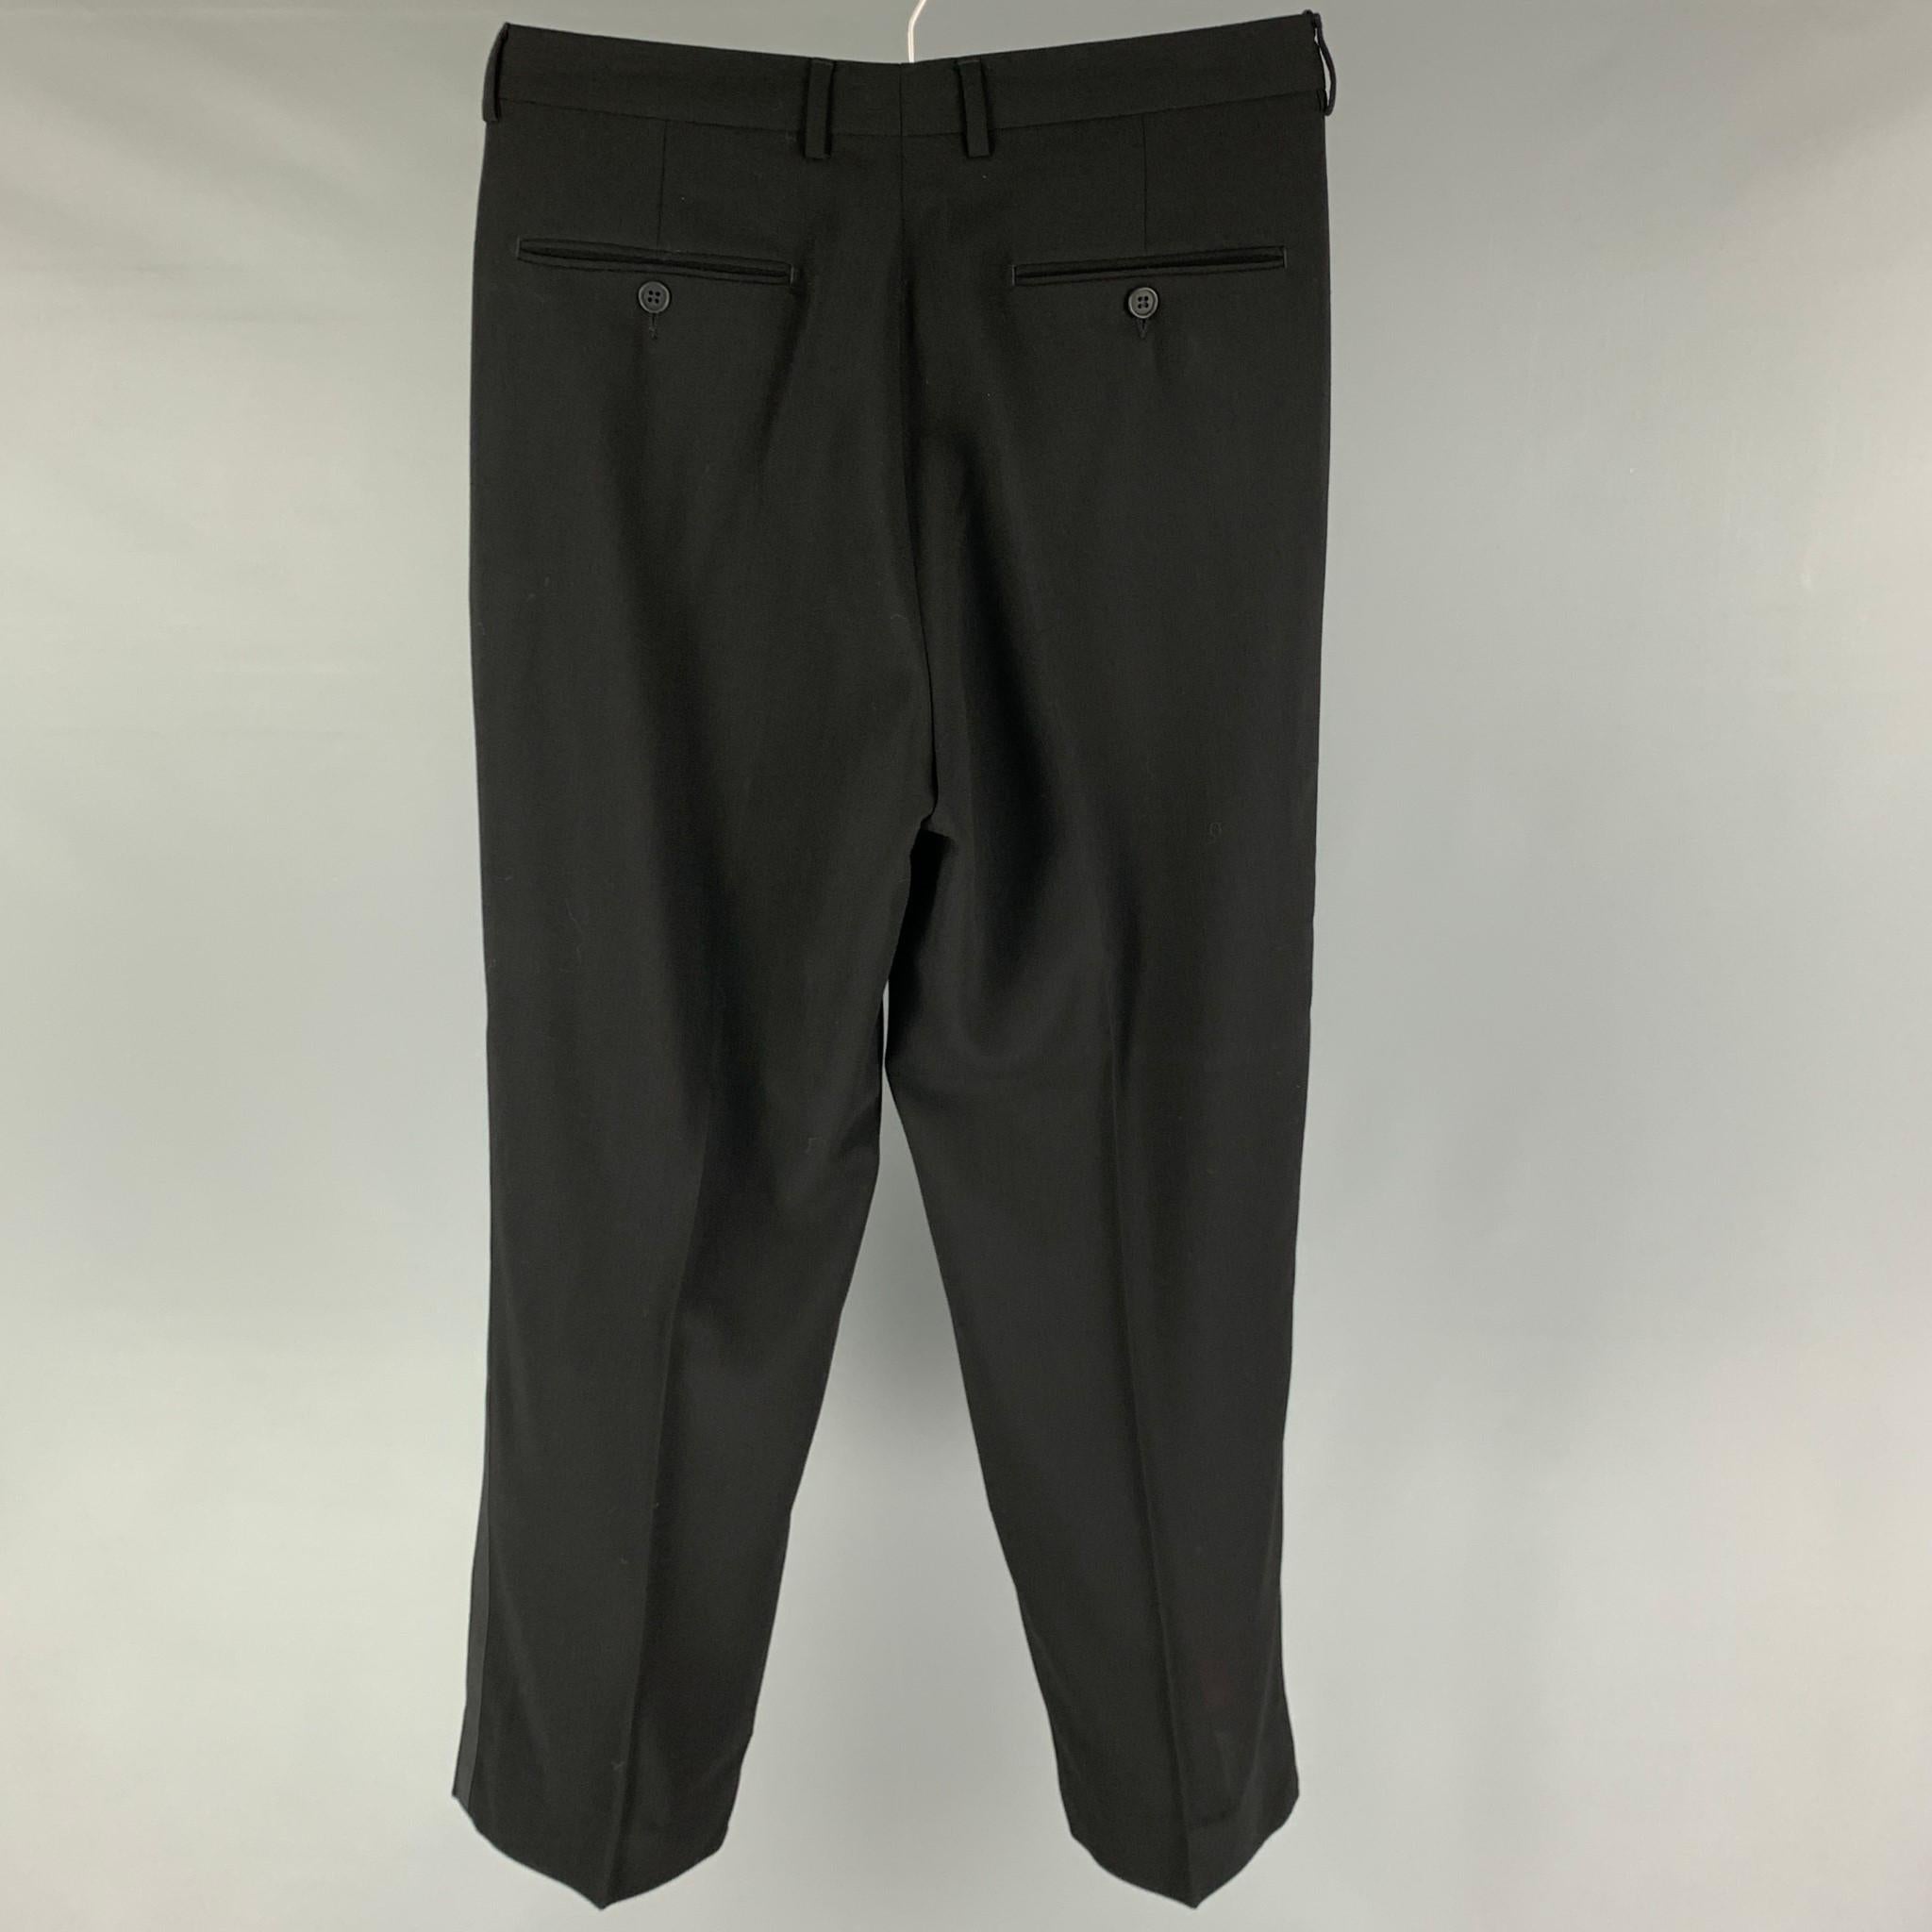 EMPORIO ARMANI tuxedo dress pants comes in a black wool featuring a pleated style, side stripe trim, and a zip fly closure. Made in Italy. 

Excellent Pre-Owned Condition.
Marked: 48

Measurements:

Waist: 30 in.
Rise: 12 in.
Inseam: 30 in.
Leg